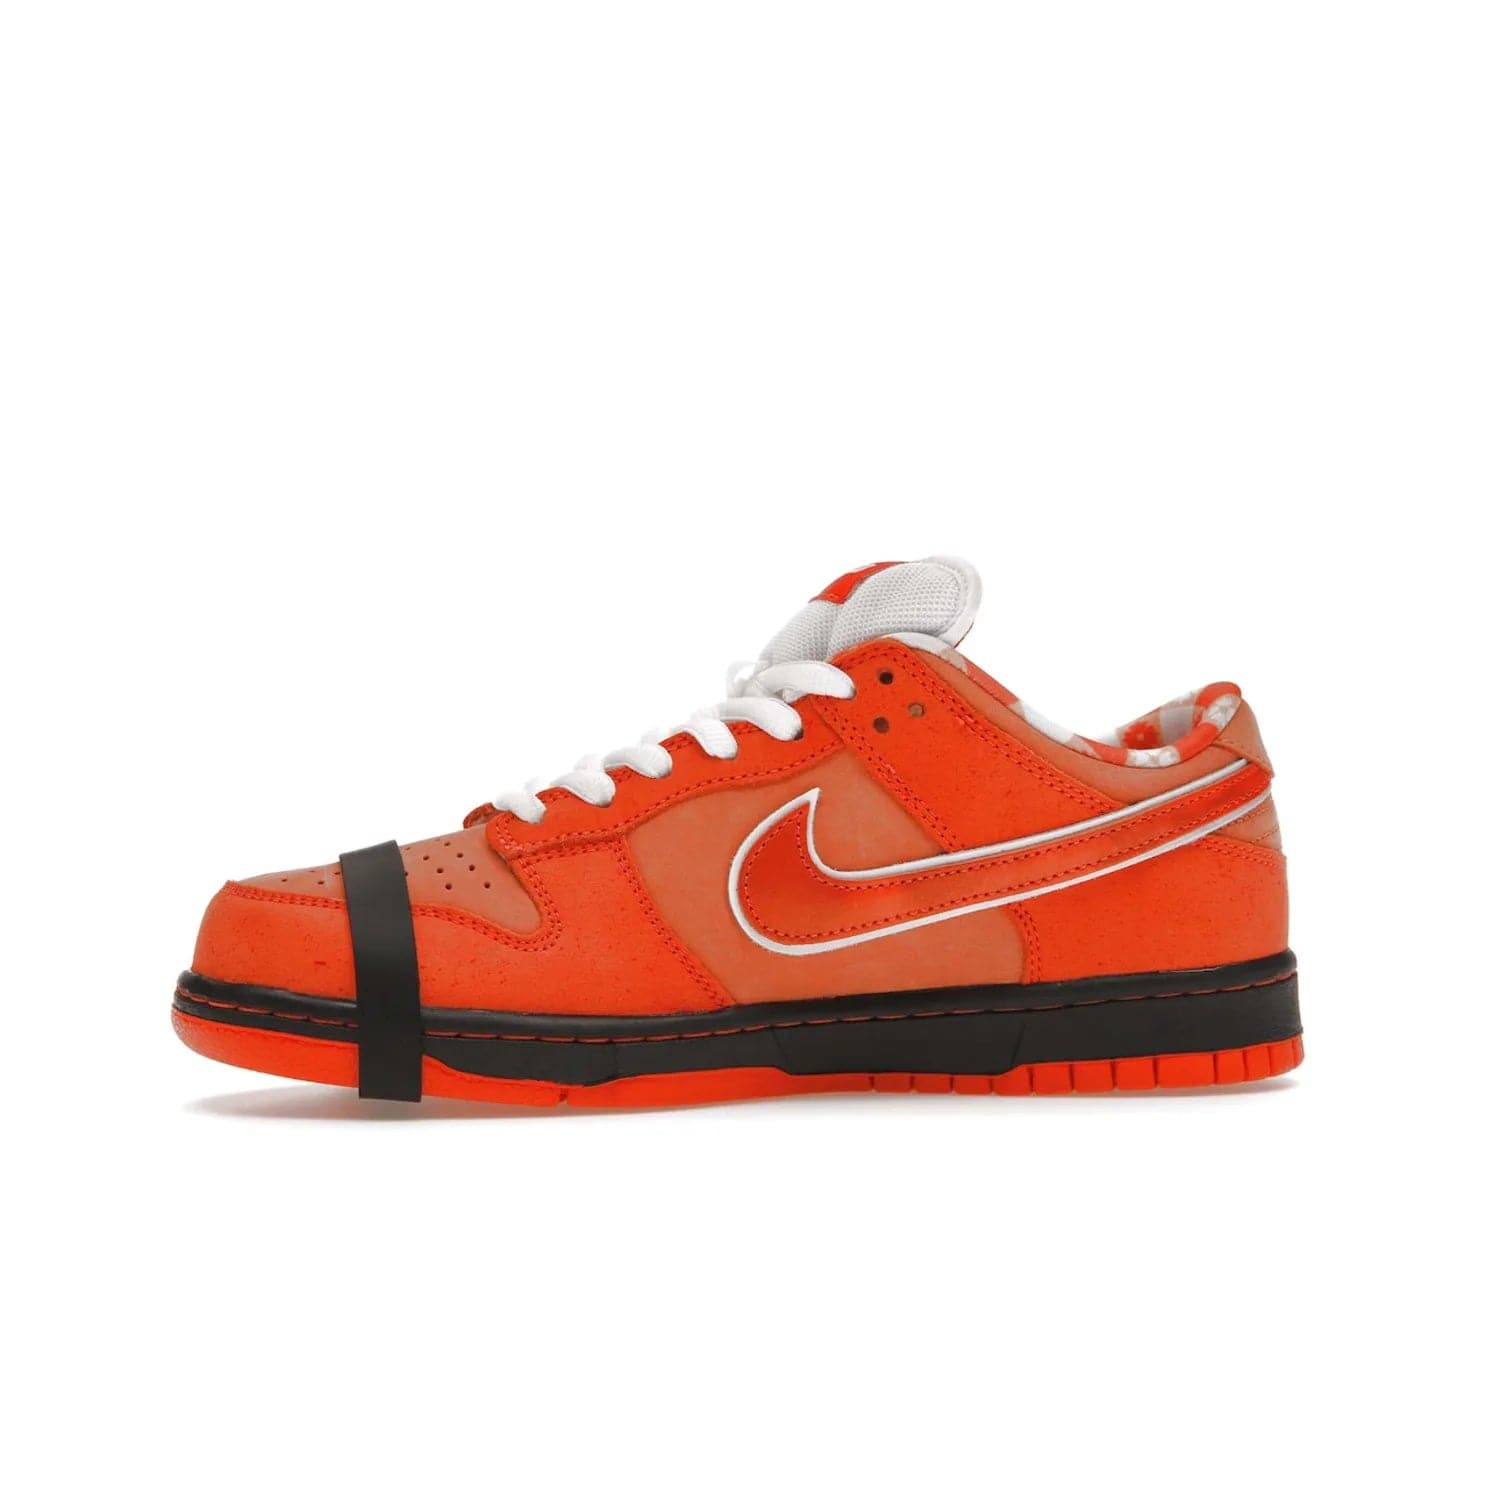 Nike SB Dunk Low Concepts Orange Lobster - Image 18 - Only at www.BallersClubKickz.com - Limited Nike SB Dunk Low Concepts Orange Lobster features premium nubuck upper with vibrant oranges for eye-catching colorblocked design. Signature Nike SB tag and bib-inspired interior for added texture. Outsole and cupsole provide extra reinforcement. Get it 12/20/2022.